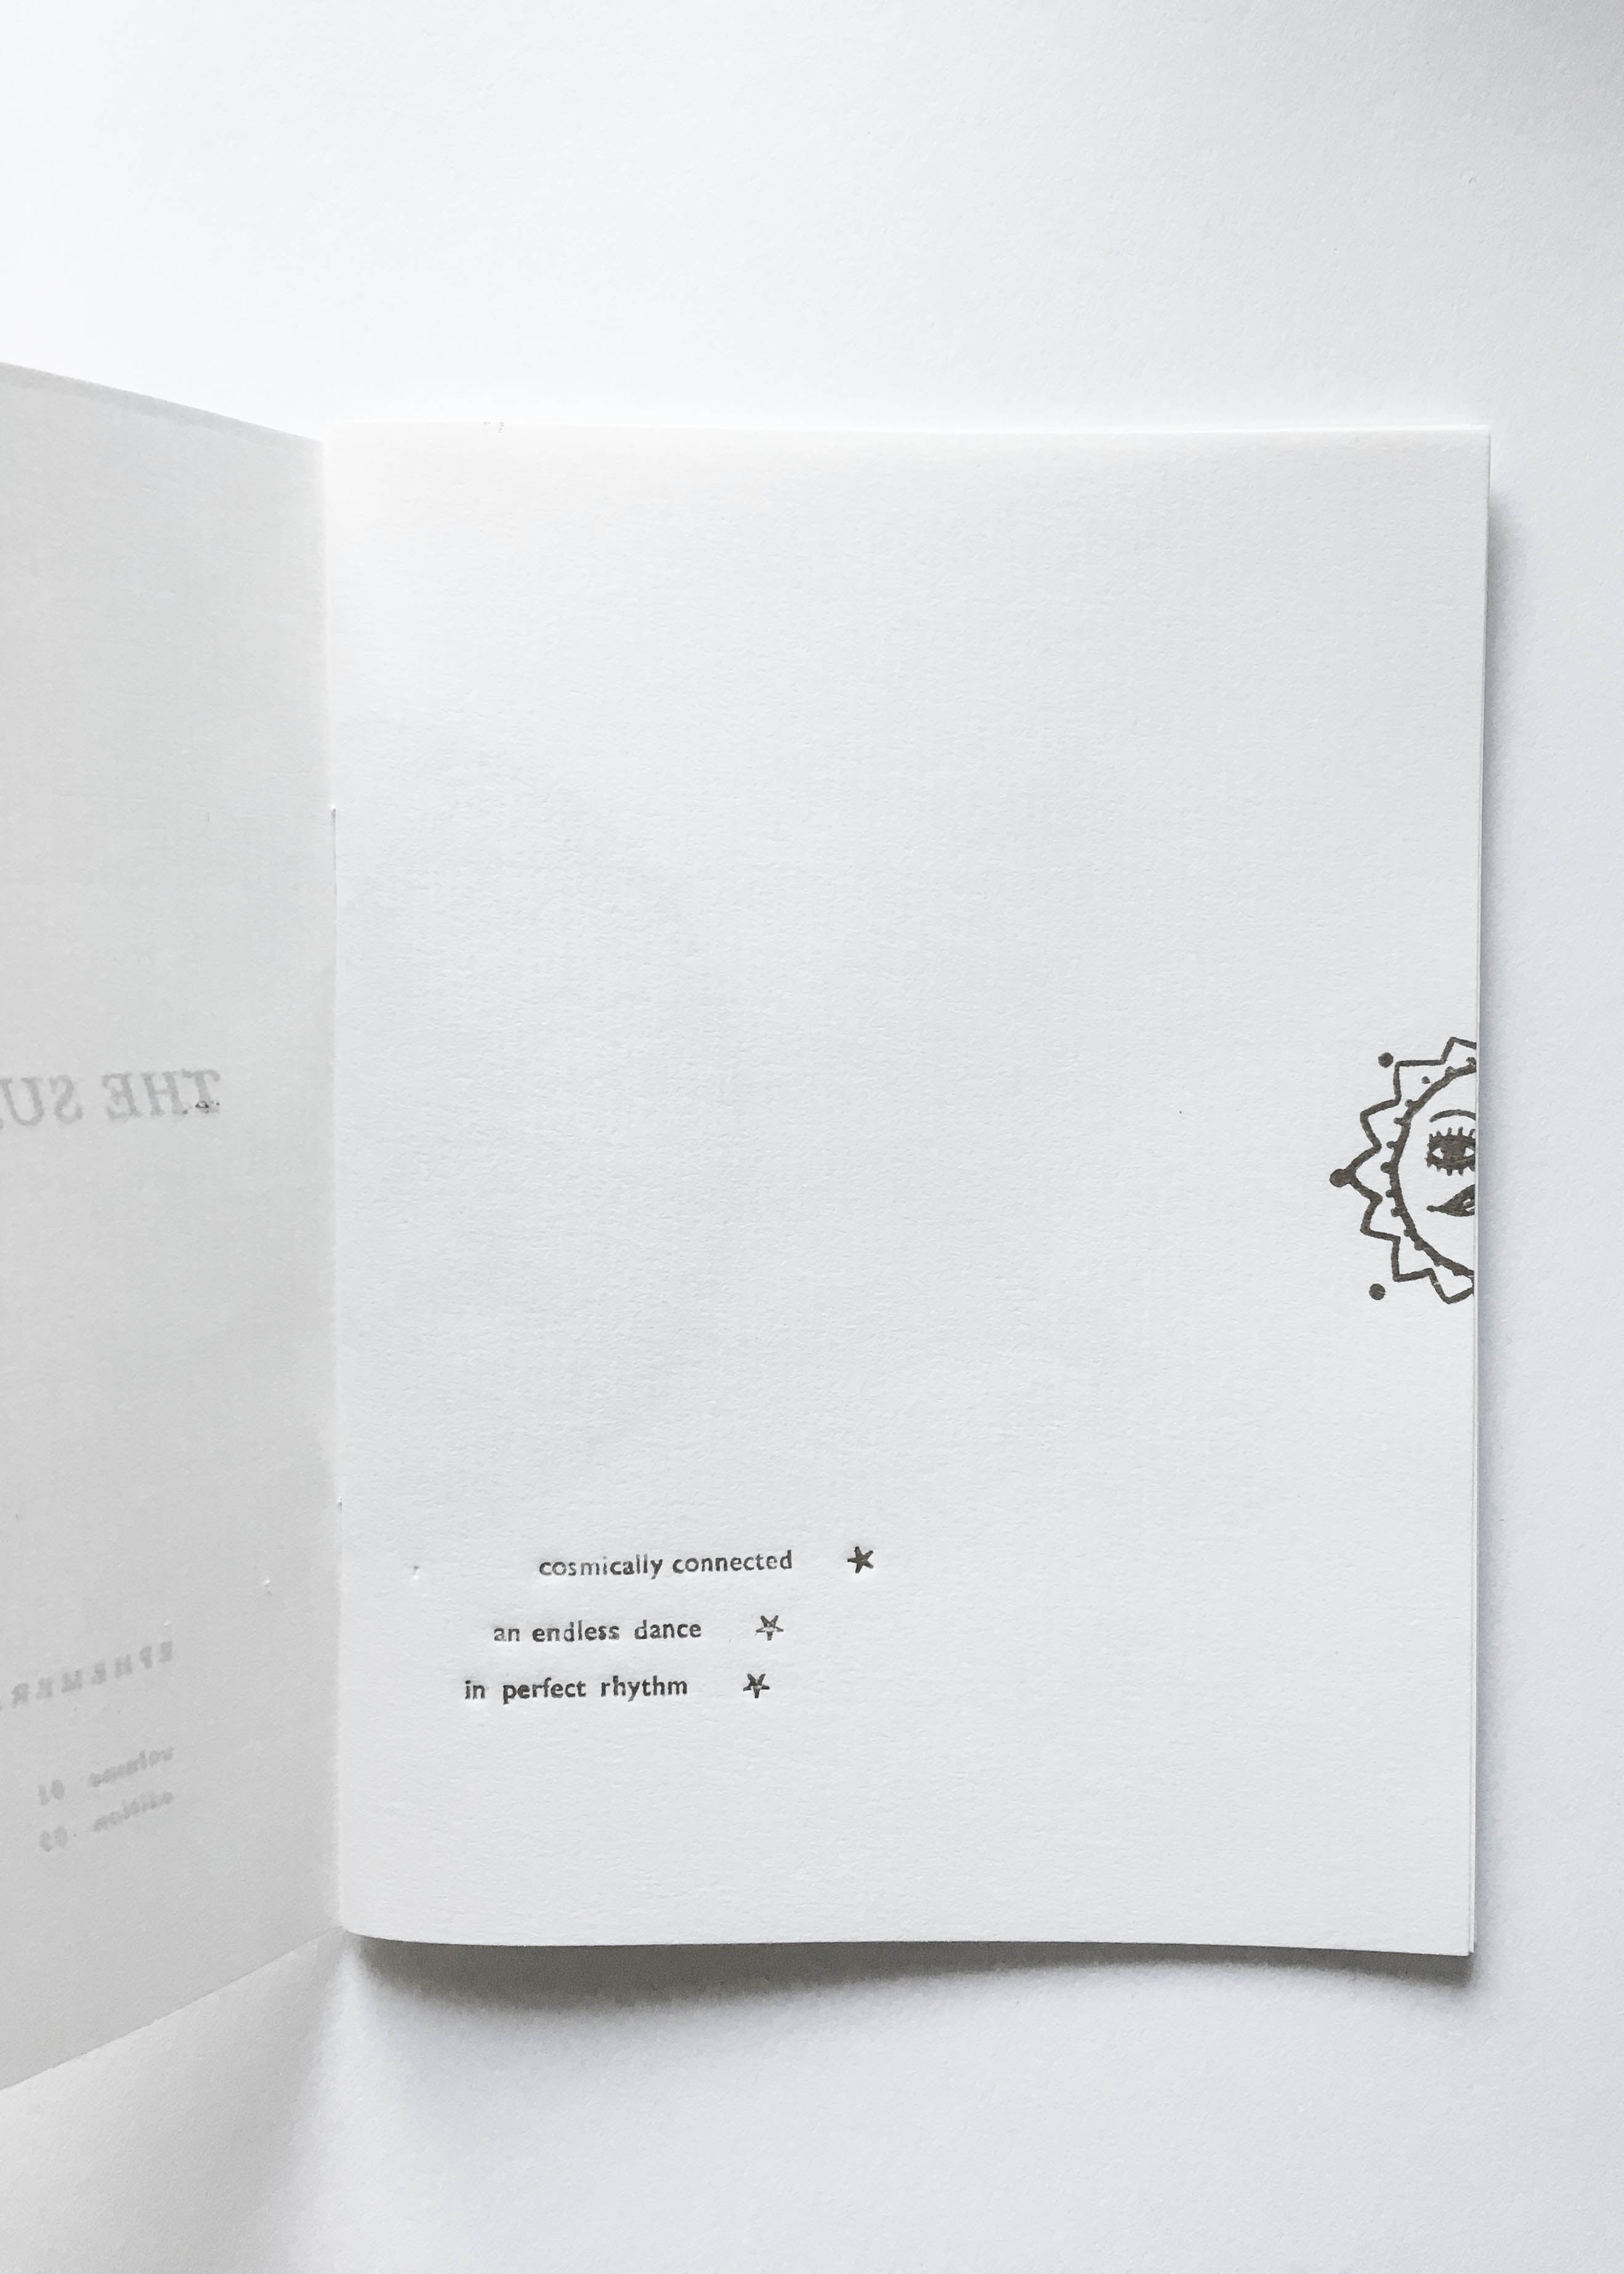 letterpress and handprinted zines art books with poetry